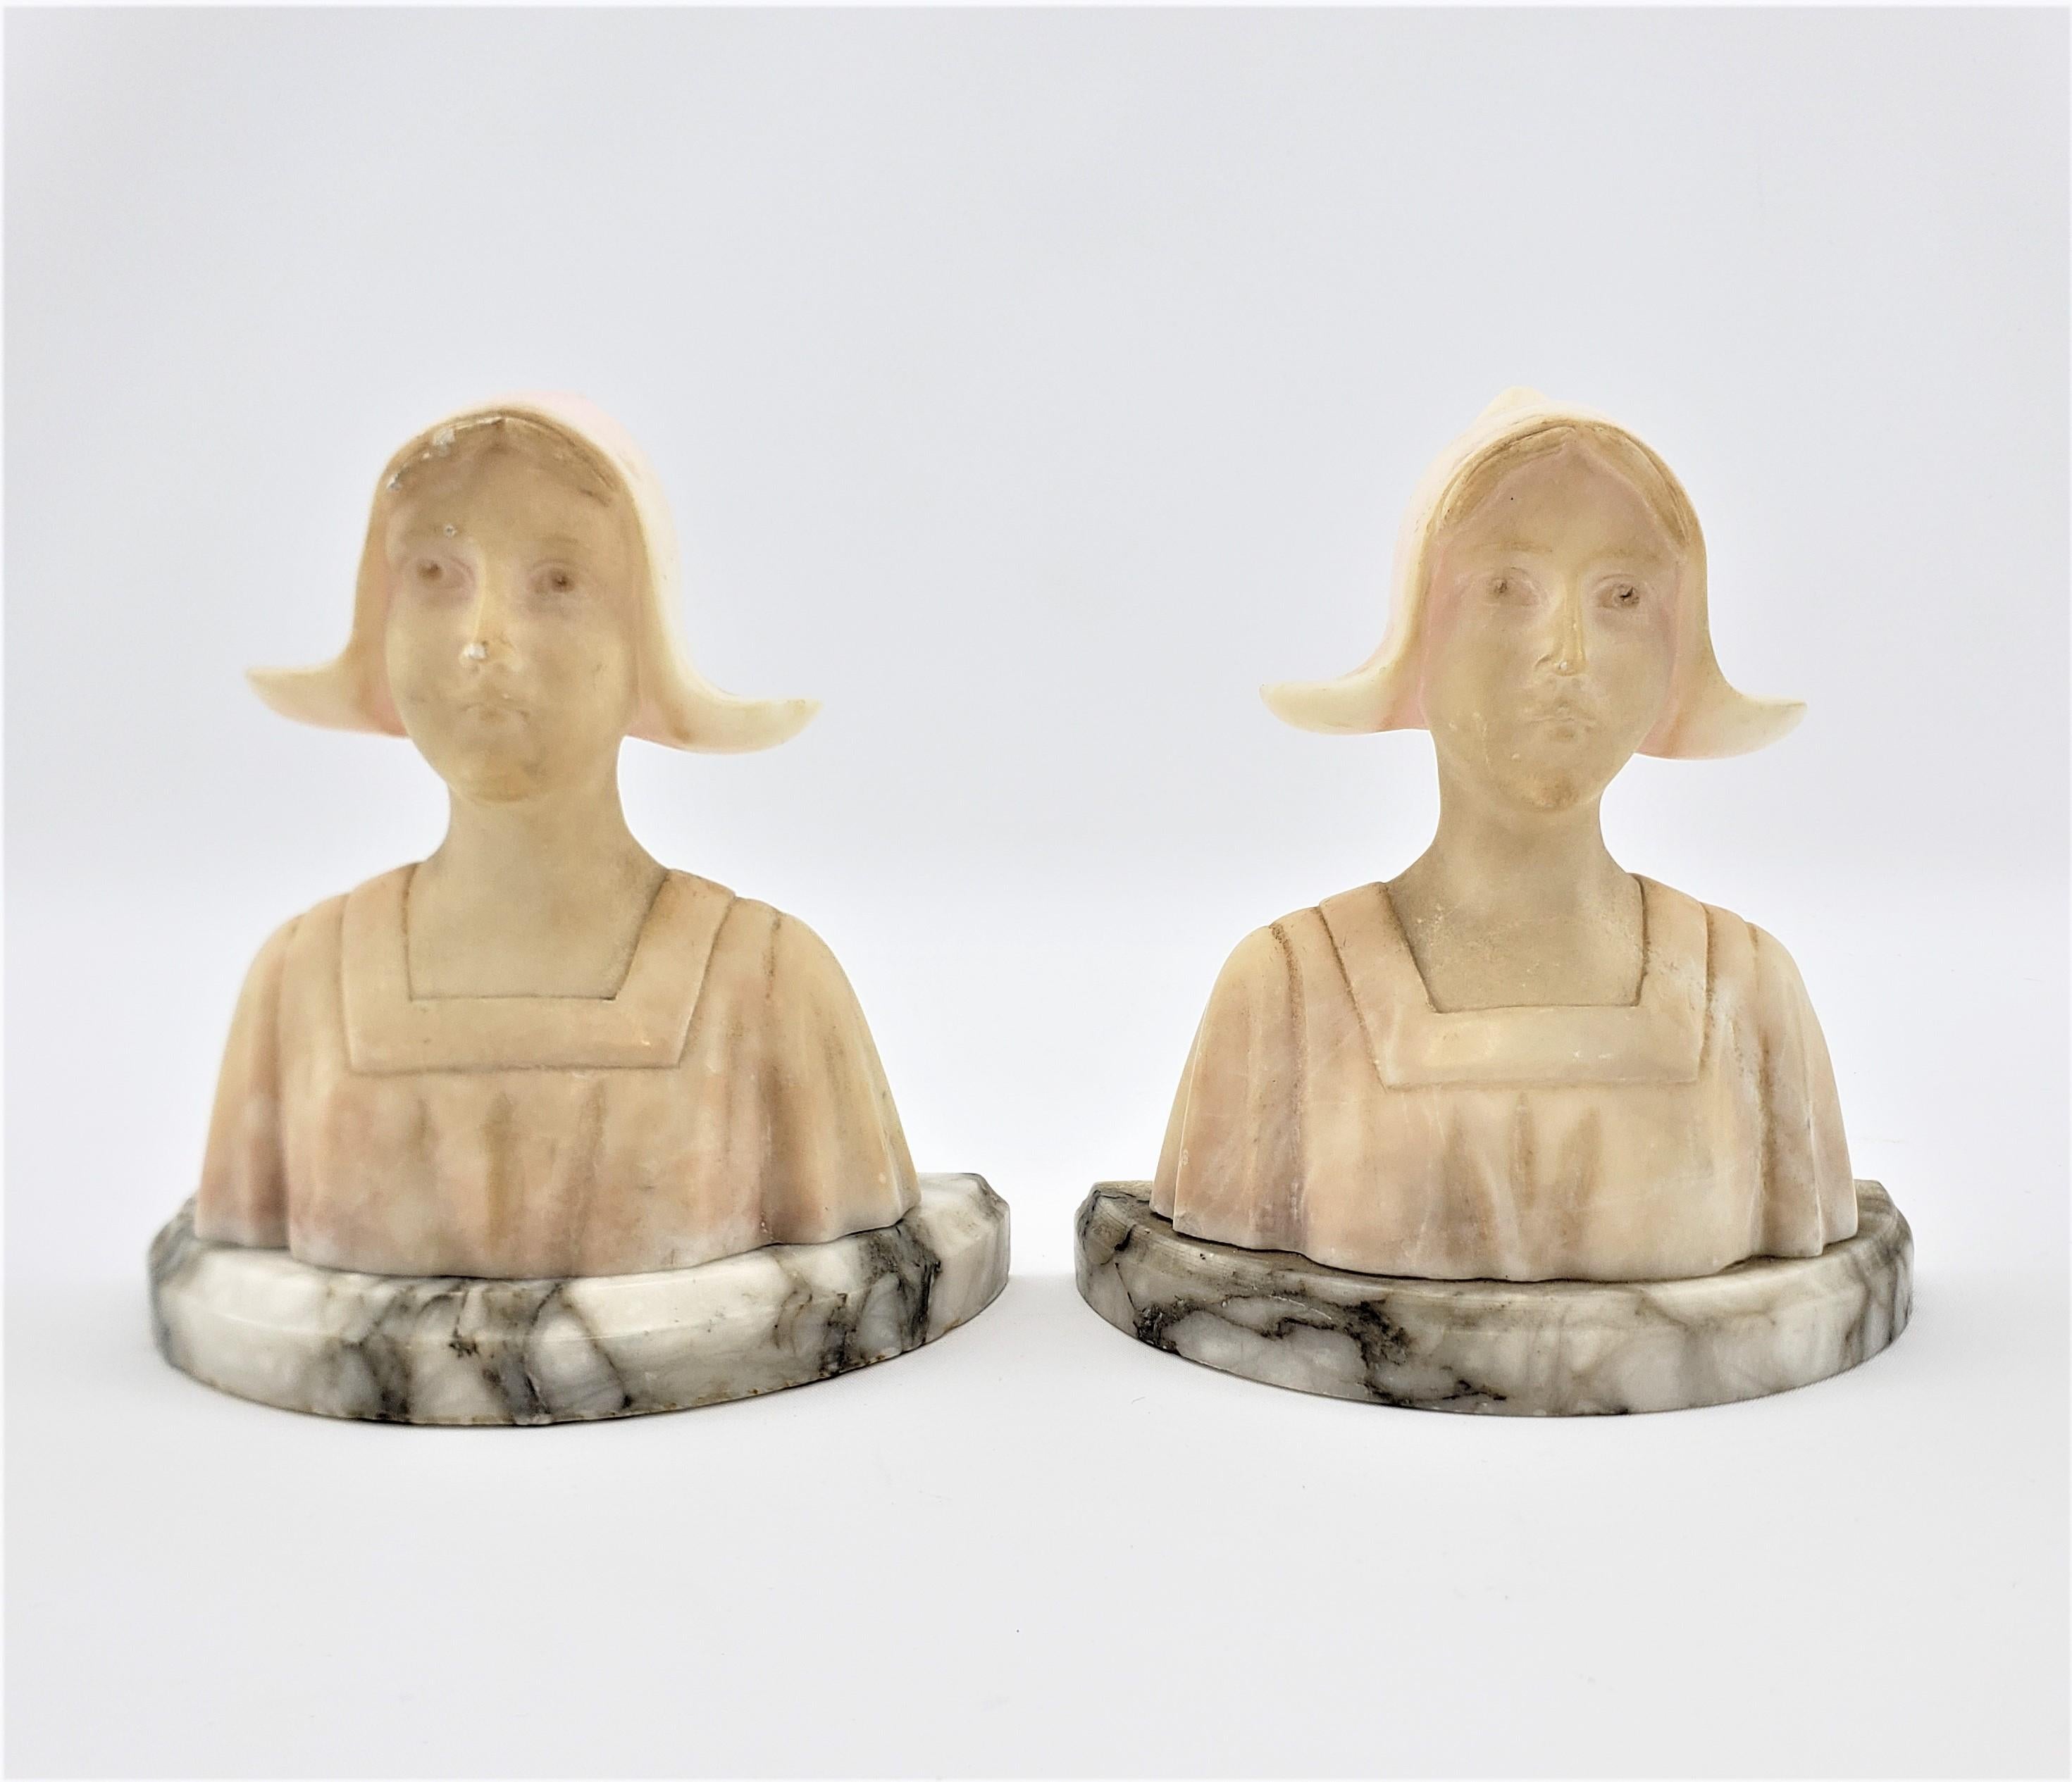 This pair of Art Deco bookends are unsigned, but presumed to have been made in the United States in approximately 1920. The bookends are composed of carved alabaster as miniature busts of maidens. The carved sculptures are set on half moon shaped